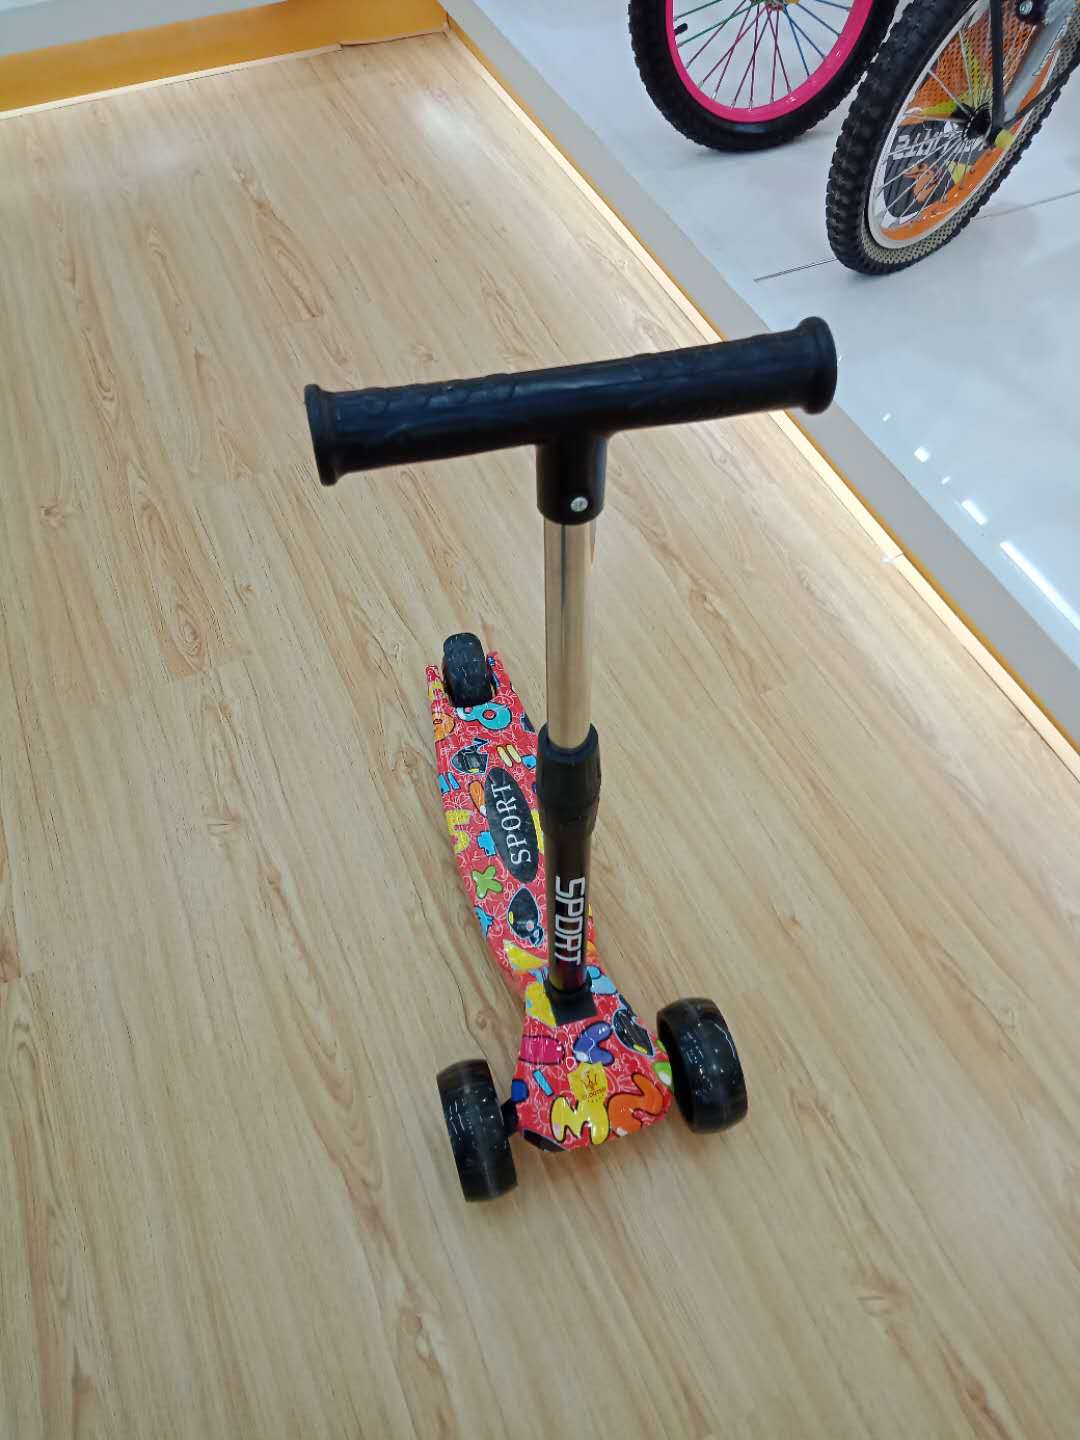 scooter for children